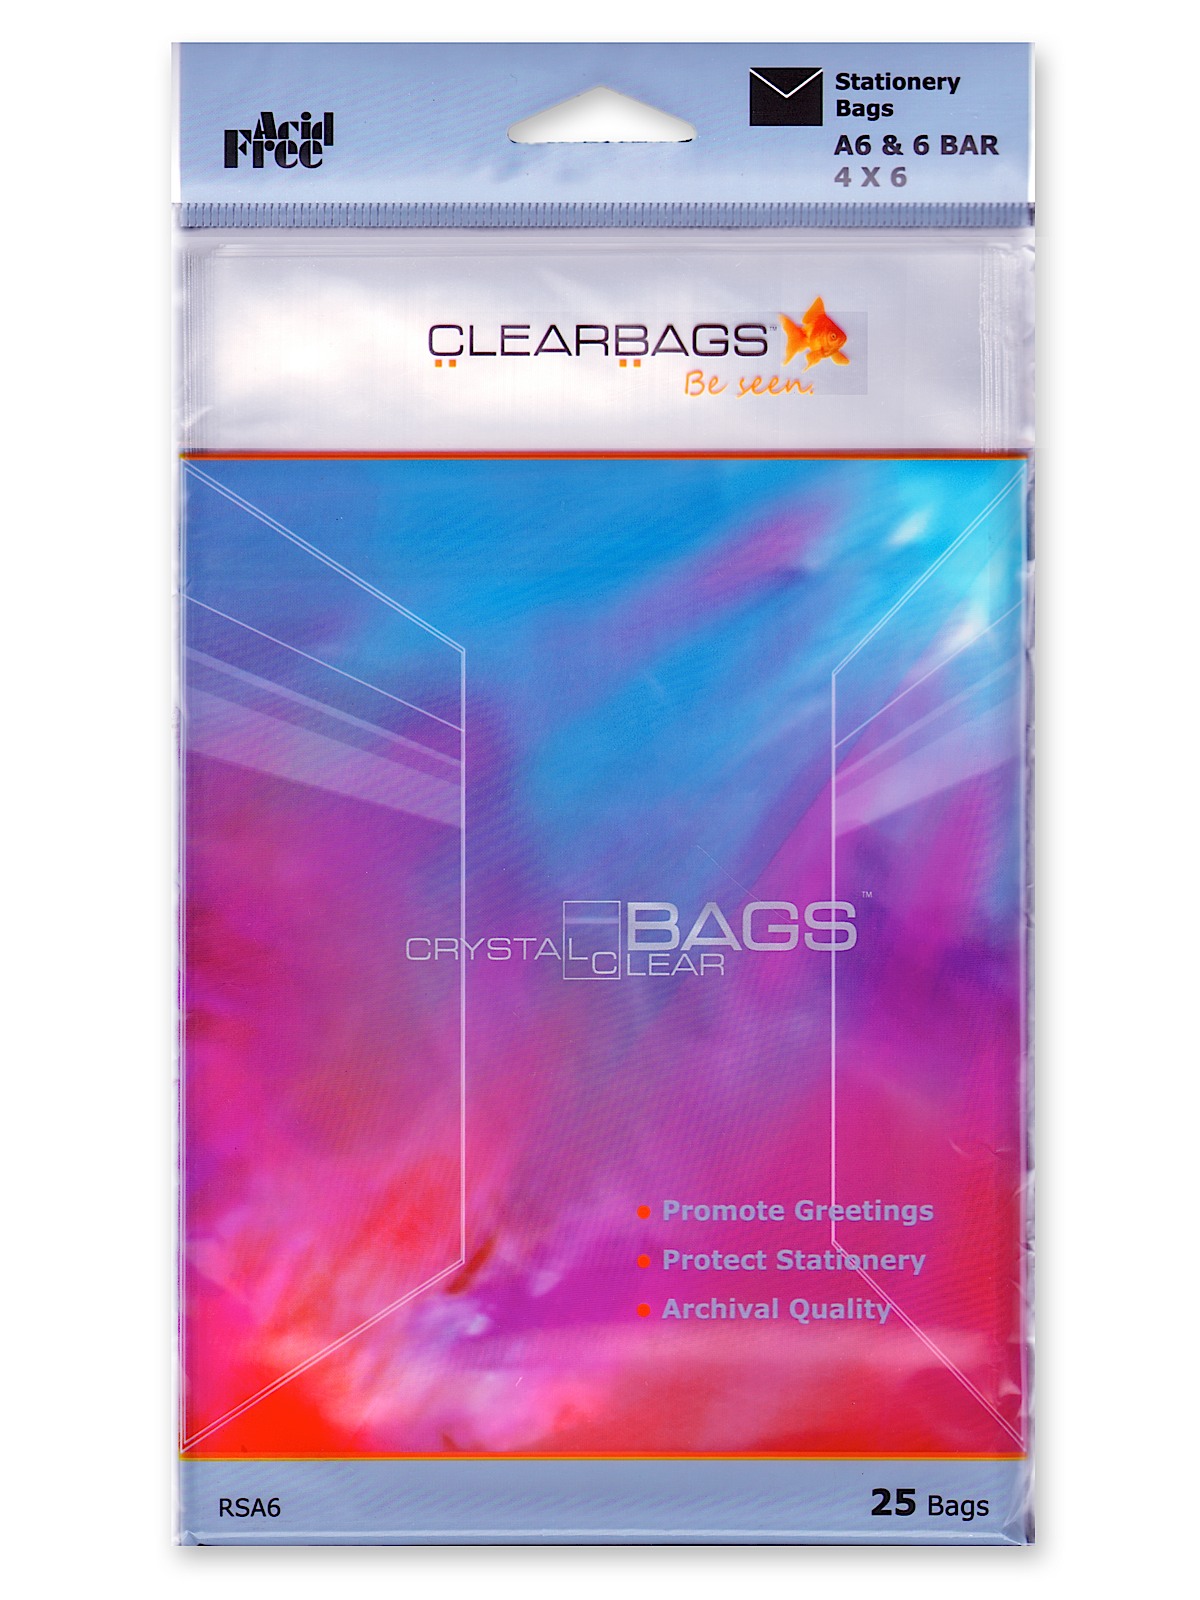 ClearBags - Crystal Clear Stationery Bags